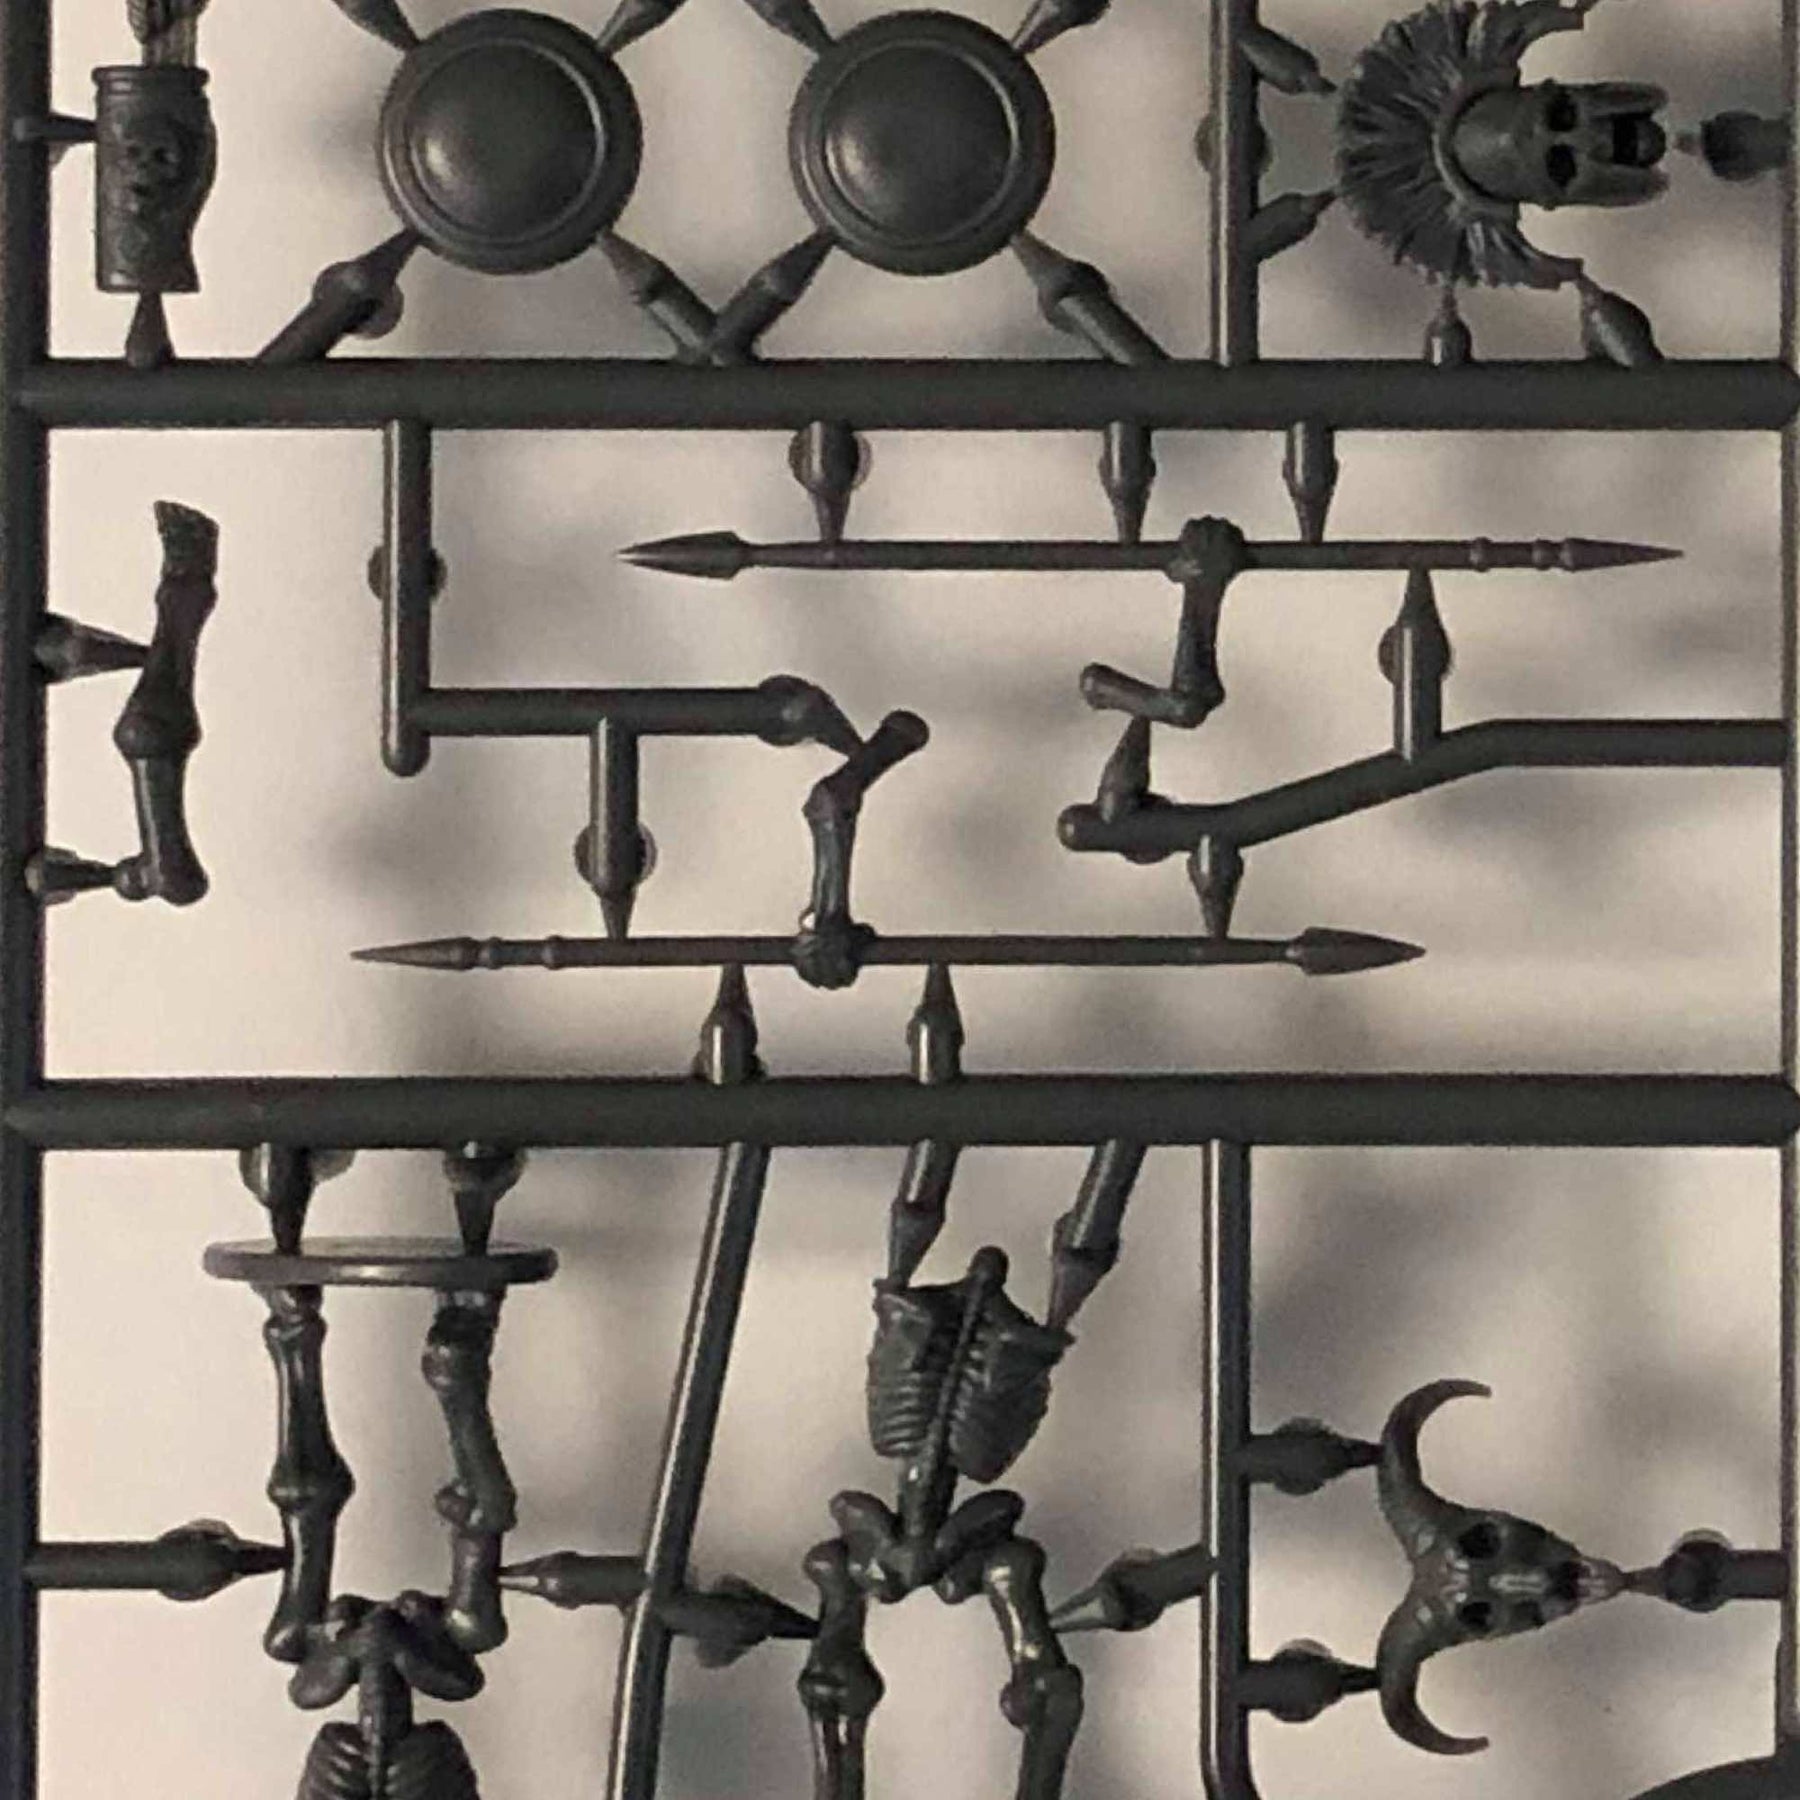 A Look at the Skeleton Sprue